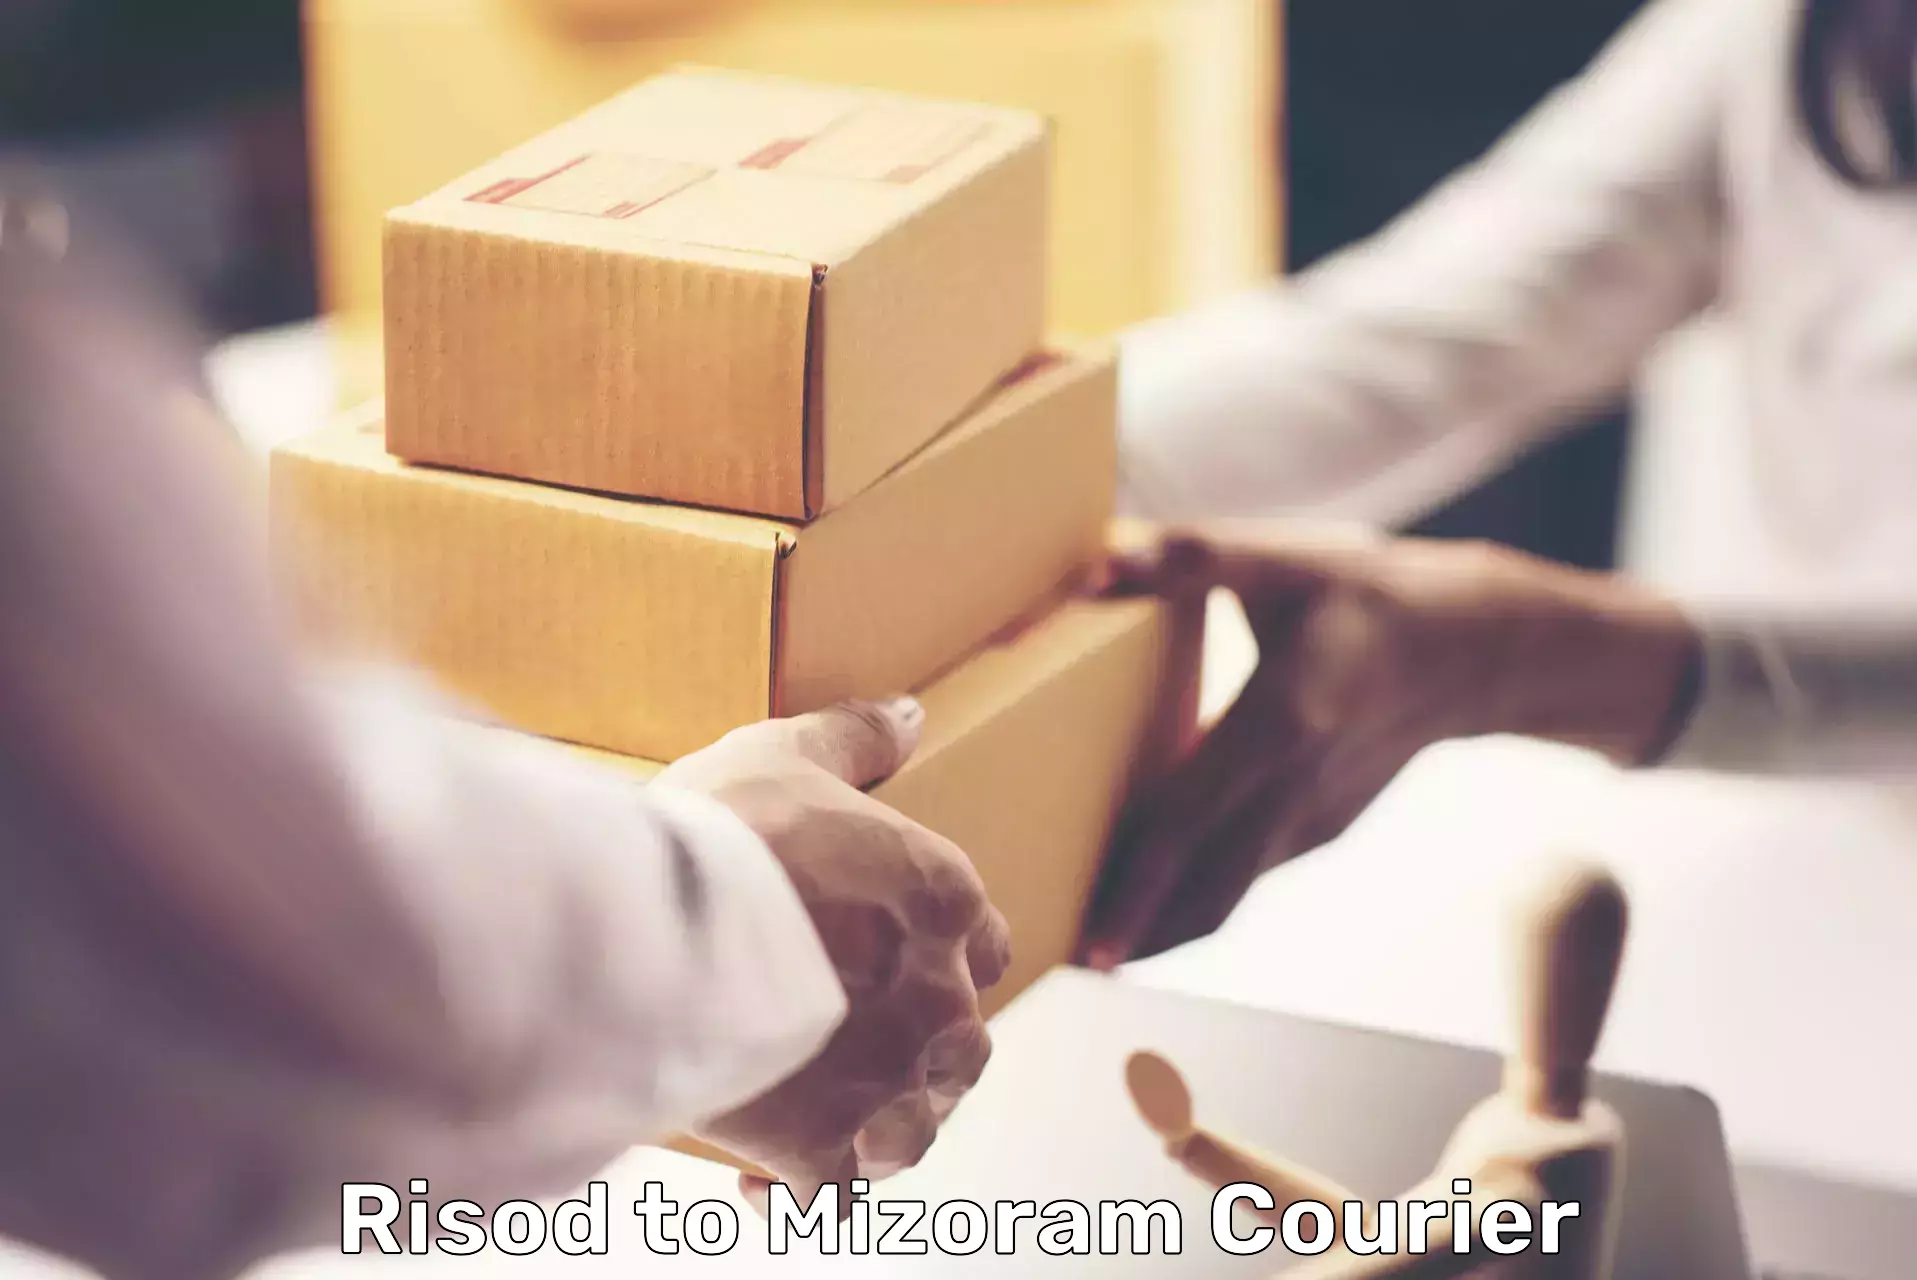 Personalized courier experiences Risod to Mizoram